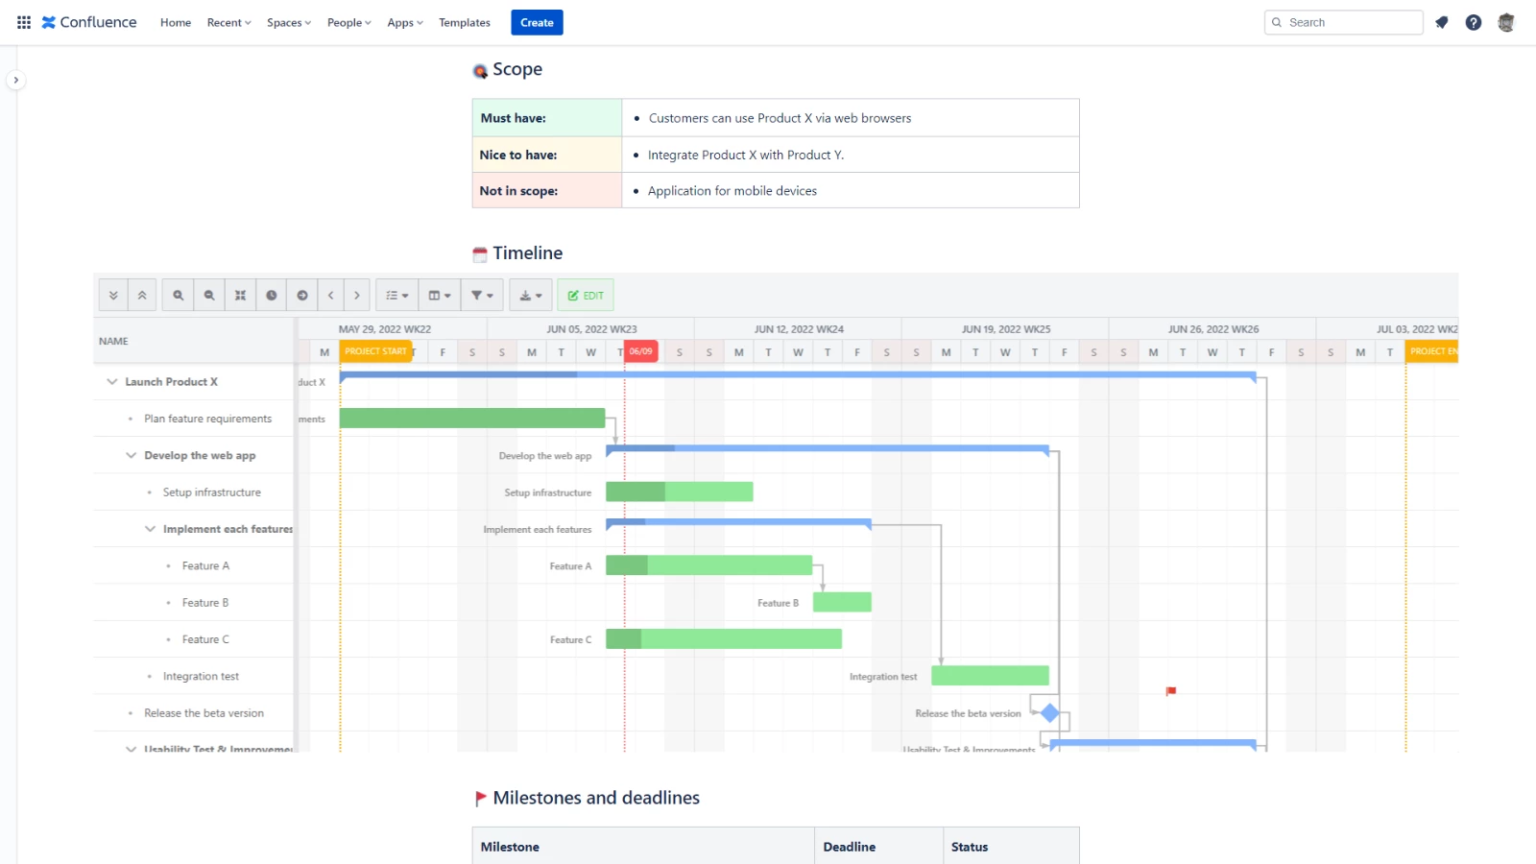 How to Create a Marketing Project Timeline in Confluence